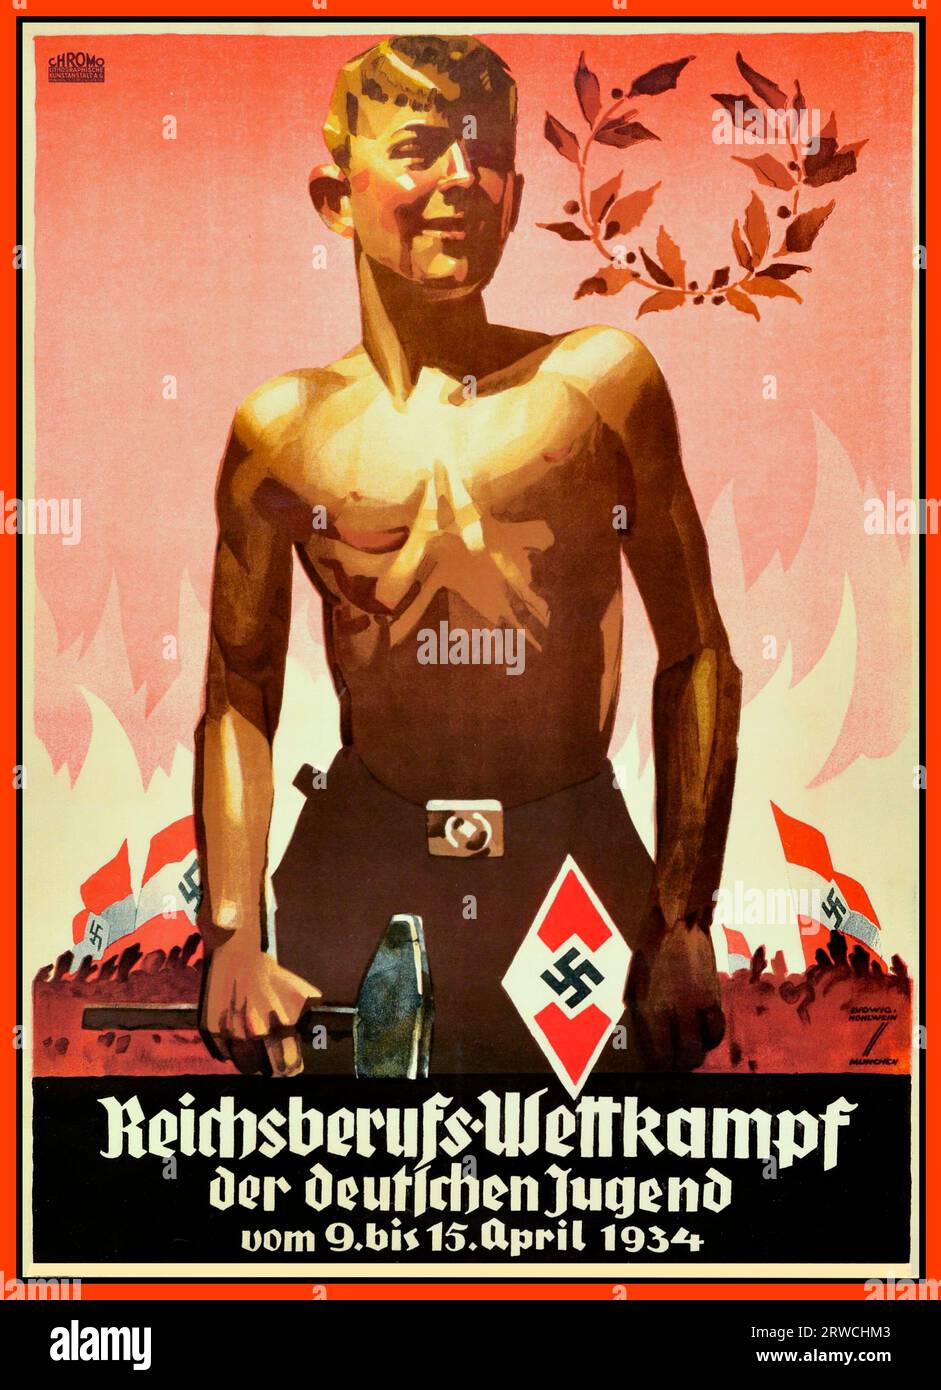 Nazi propaganda poster - 1934 Reich Professional Competition of the German Youth / “Reichsberufswettkampf der Deutschen Jugend” featuring an illustration by German poster artist Ludwig Hohlwein (1874-1949) depicting a young boy holding a hammer with crowds carrying Nazi Germany flags and laurel leaf wreath above, set over a red and white flame background. Nazi Germany designer: Ludwig Hohlwein : 1934. Stock Photo